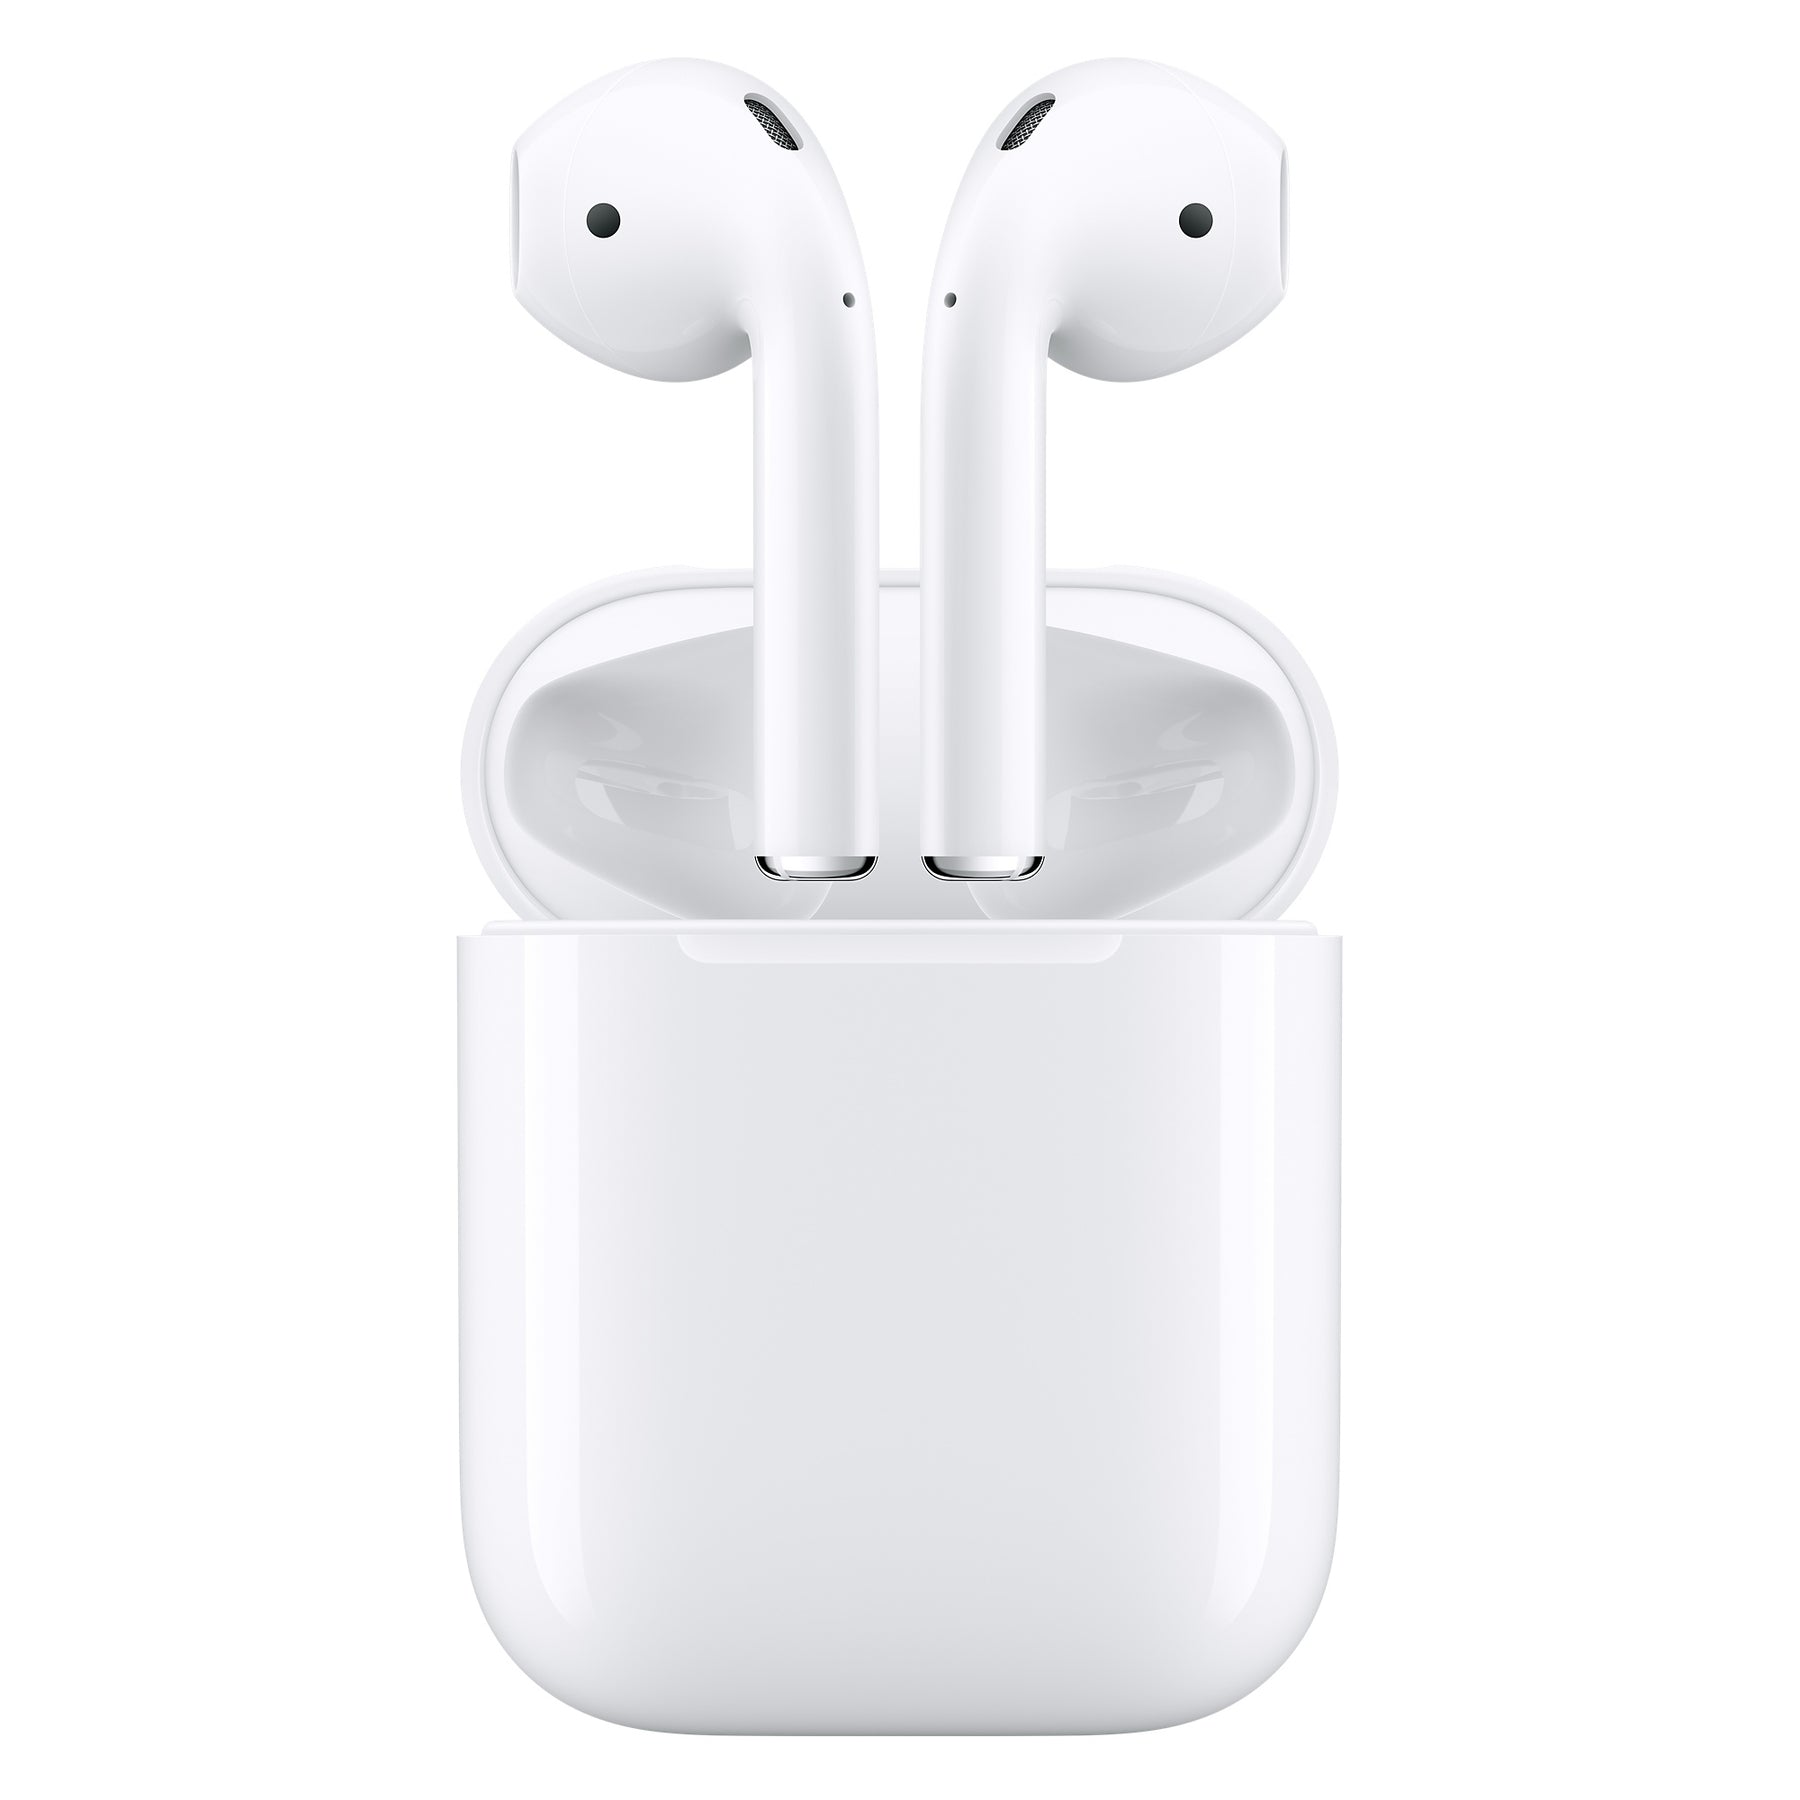 Apple AirPods (1st Generation) with Lightning Charging Case - Good Condition